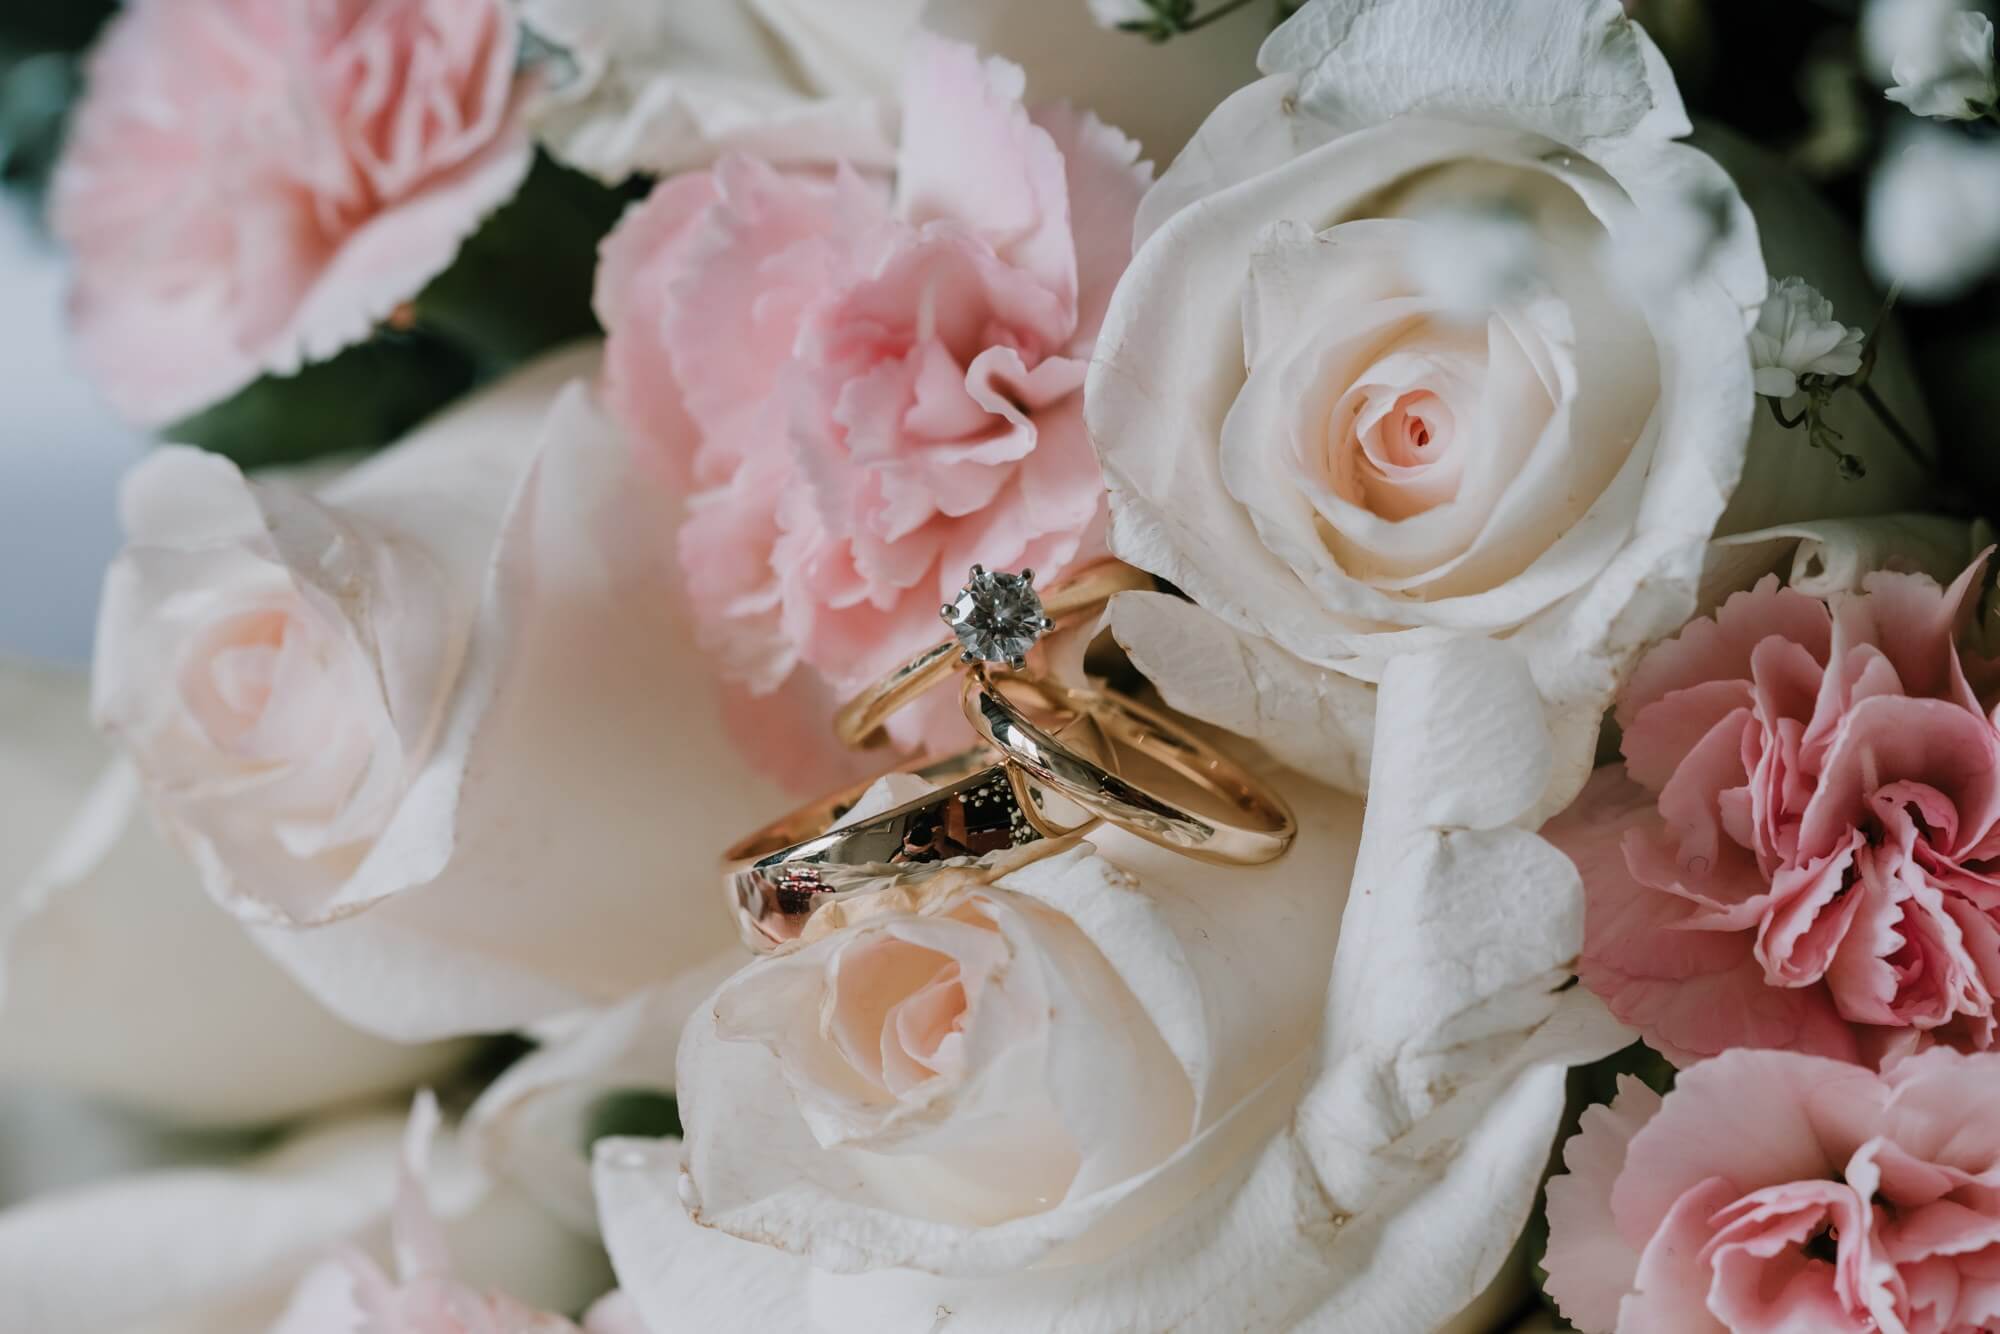 Three gold bands sits prettily on top of white roses and powder pink carnations